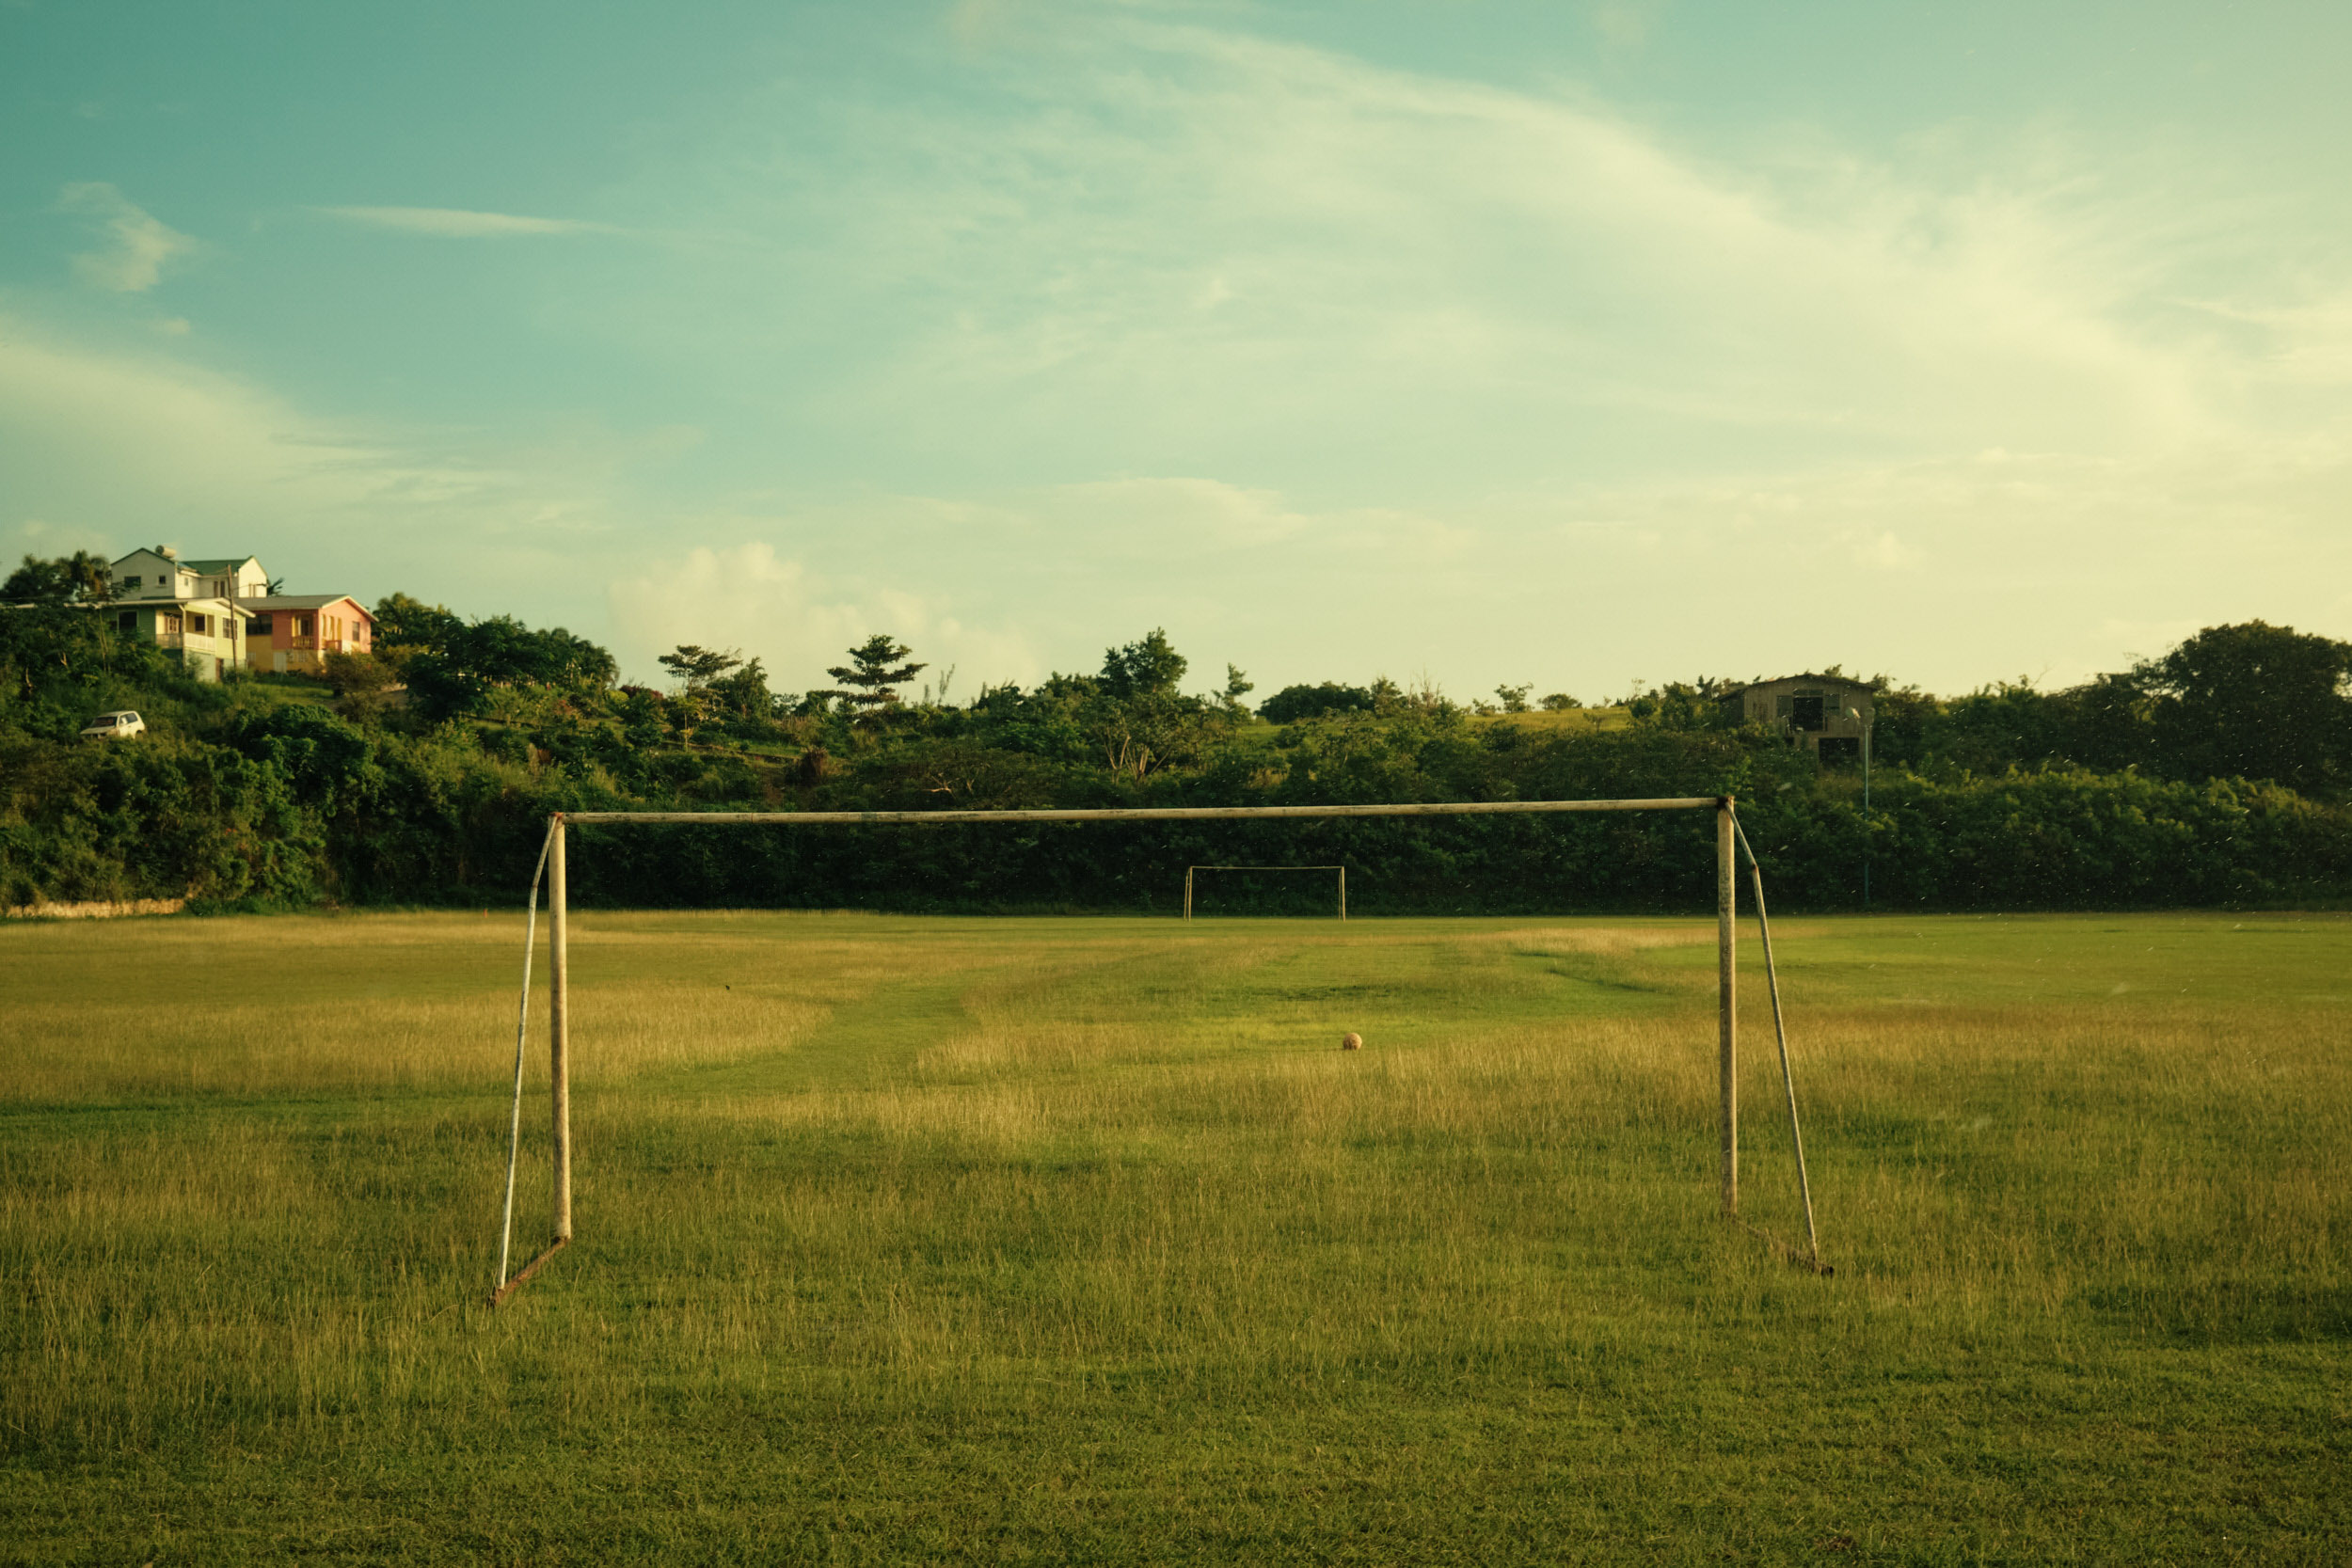 THE GOAL POSTS OF A SOCCER FIELD IN BARBADOS